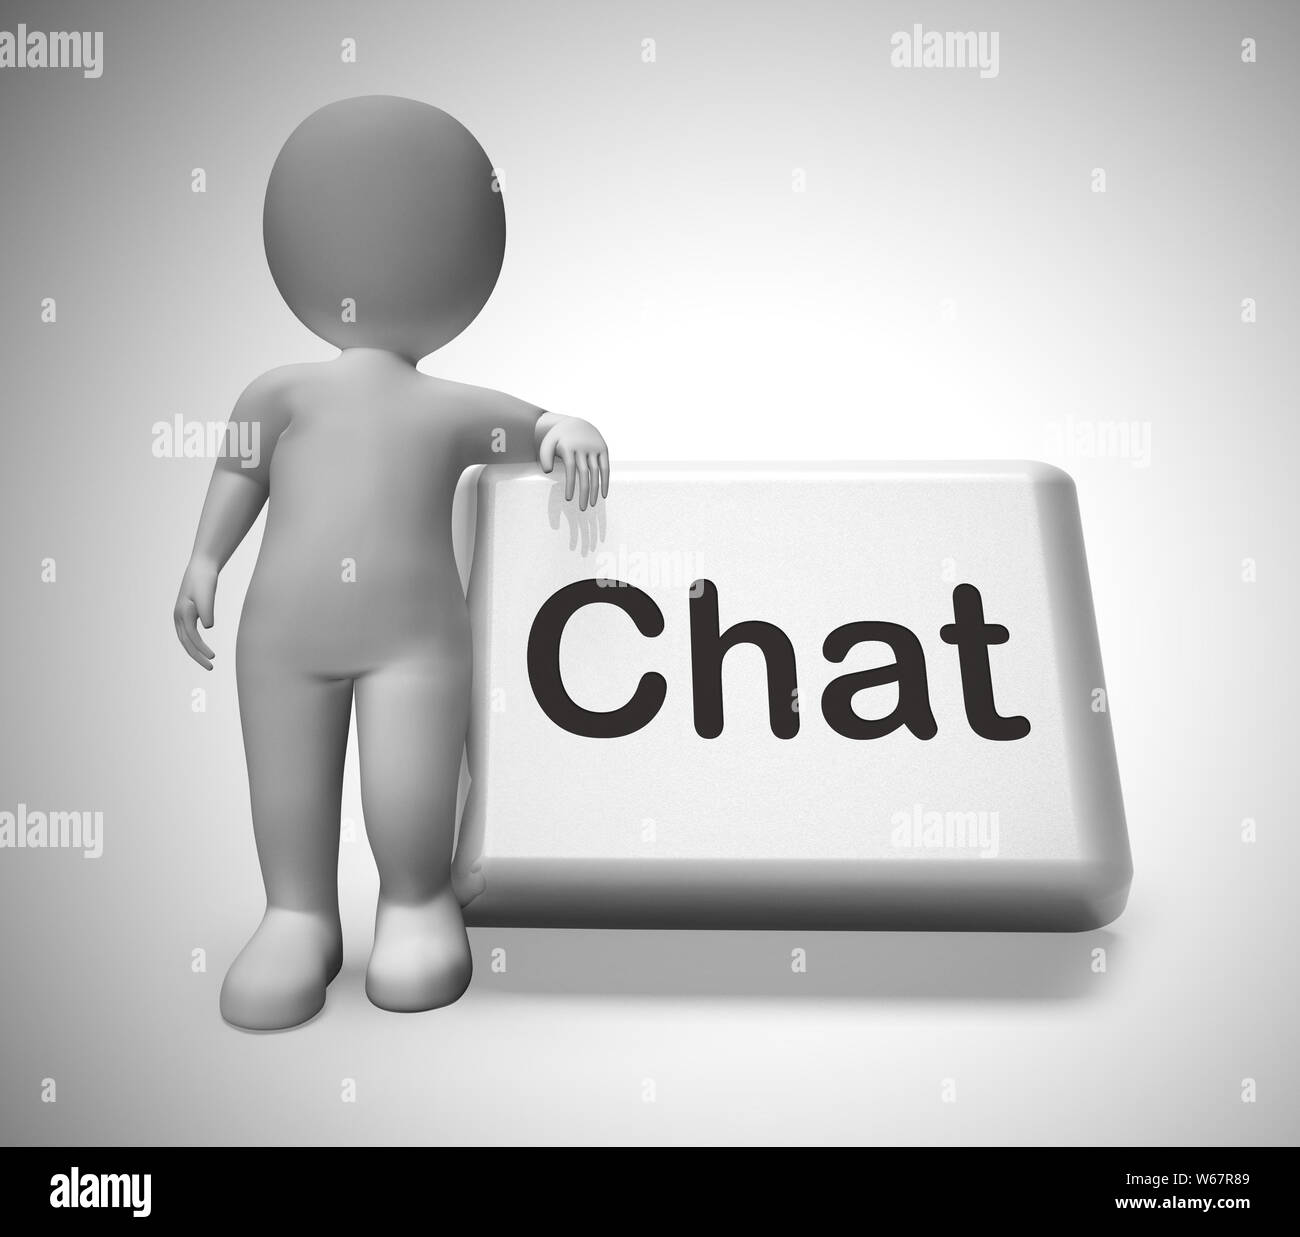 Chat online icon for discussion on the web. Chatroom social network or online conference - 3d illustration Stock Photo